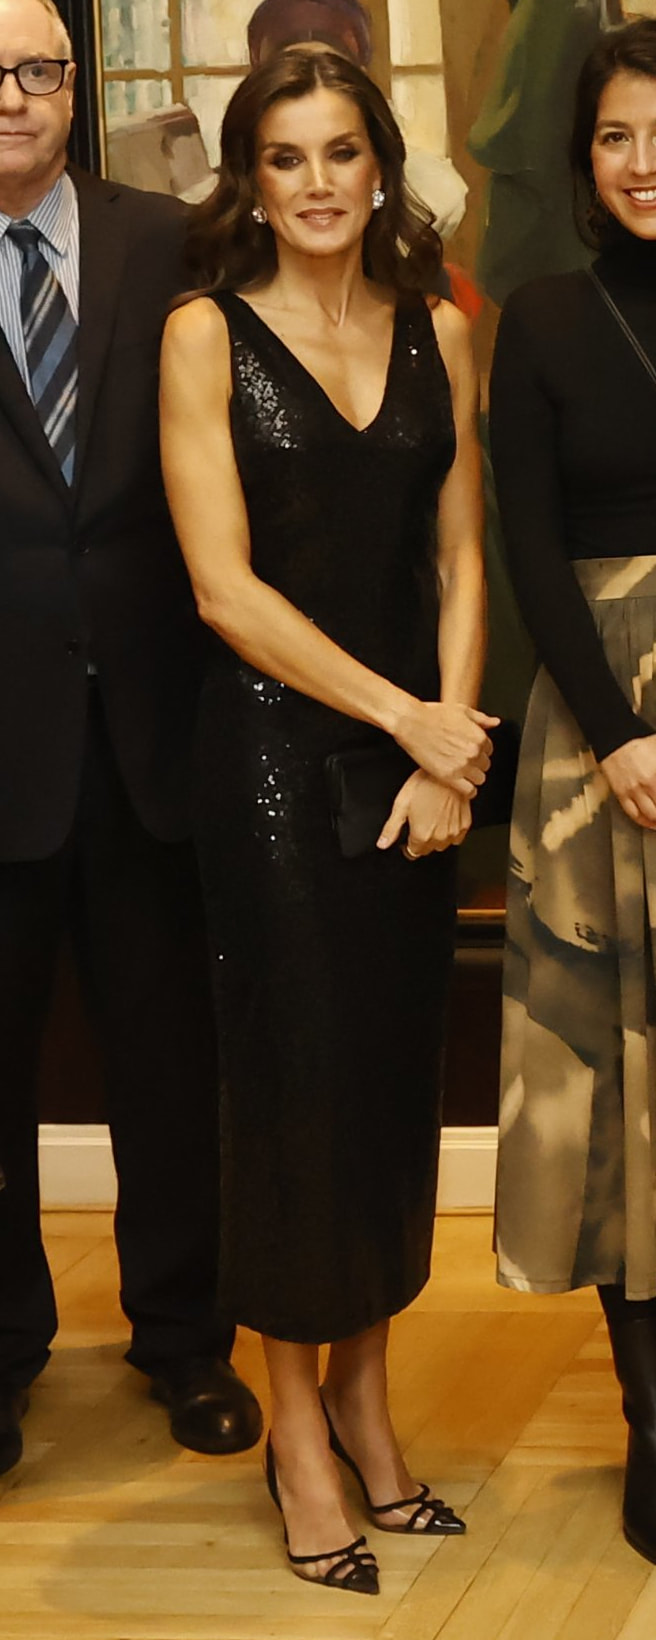 Rotate Sequin-Embellished Open-Back Dress in Black as seen on Queen Letizia.